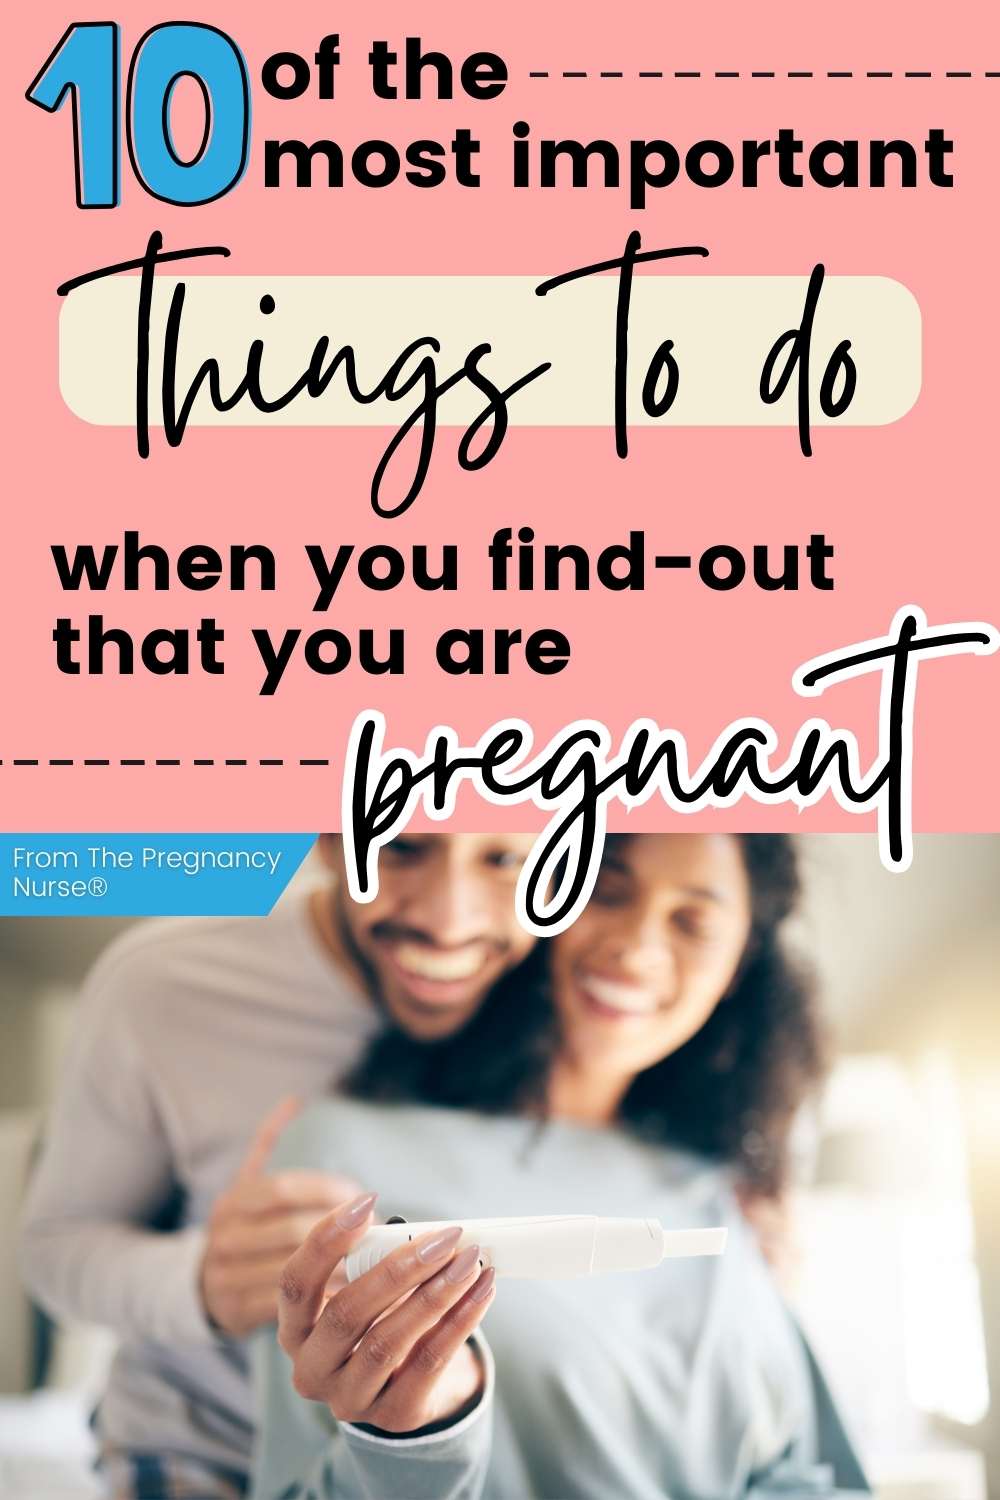 Just found out you're pregnant? Start your journey with confidence using our essential checklist! Learn about scheduling your first prenatal appointment, taking prenatal vitamins, and making healthy lifestyle changes. Explore tips for sharing the news, managing early symptoms, and preparing for the months ahead. Embrace this exciting time with our helpful guide. Keywords: newly pregnant, first steps, prenatal care, pregnancy tips, healthy pregnancy, prenatal vitamins, early pregnancy, pregnancy checklist, pregnancy planning.